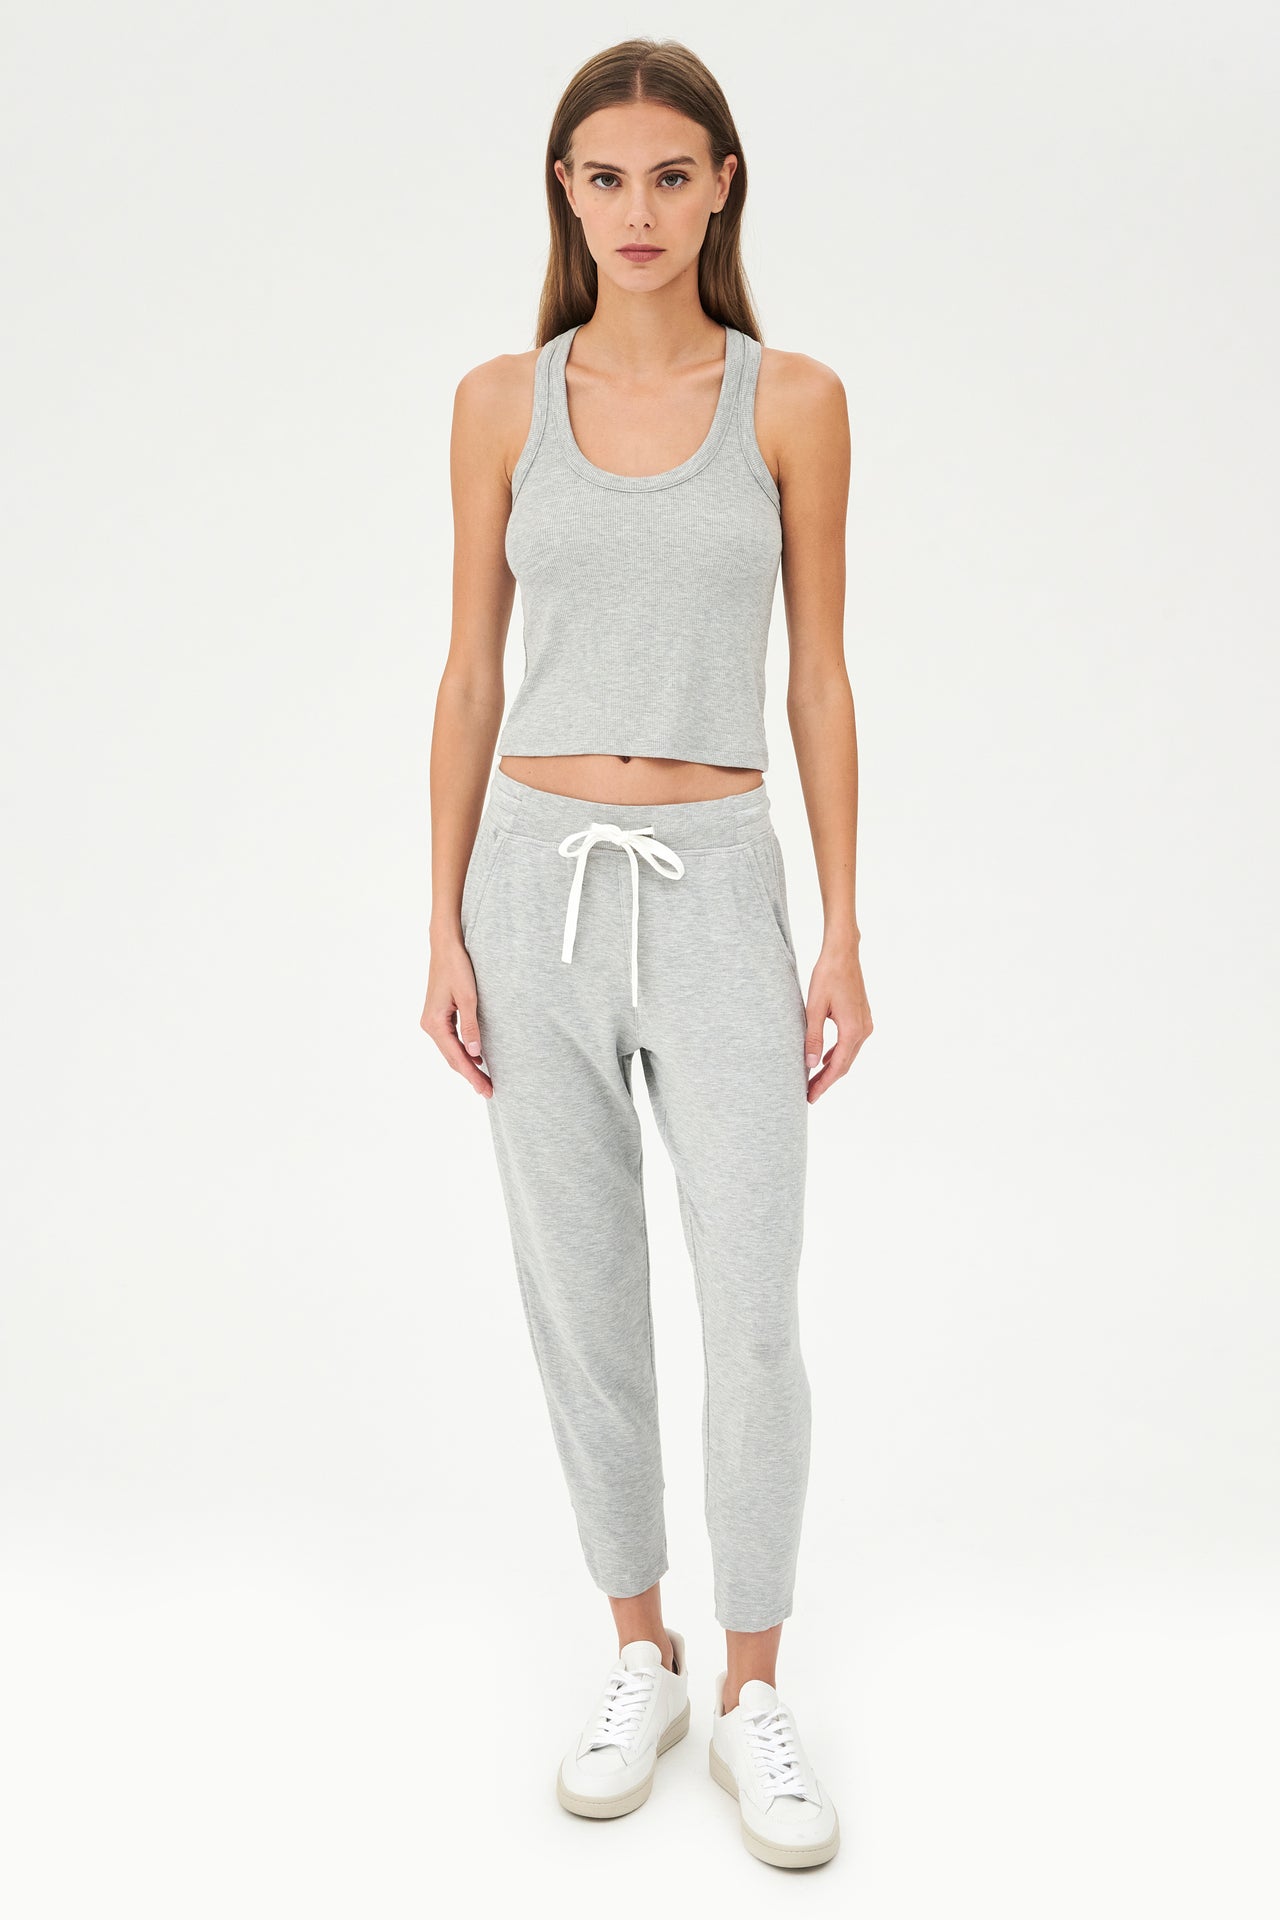 Full front view of girl wearing a ribbed grey cropped tank top and grey sweatpants with a white tie along the waistband with white shoes